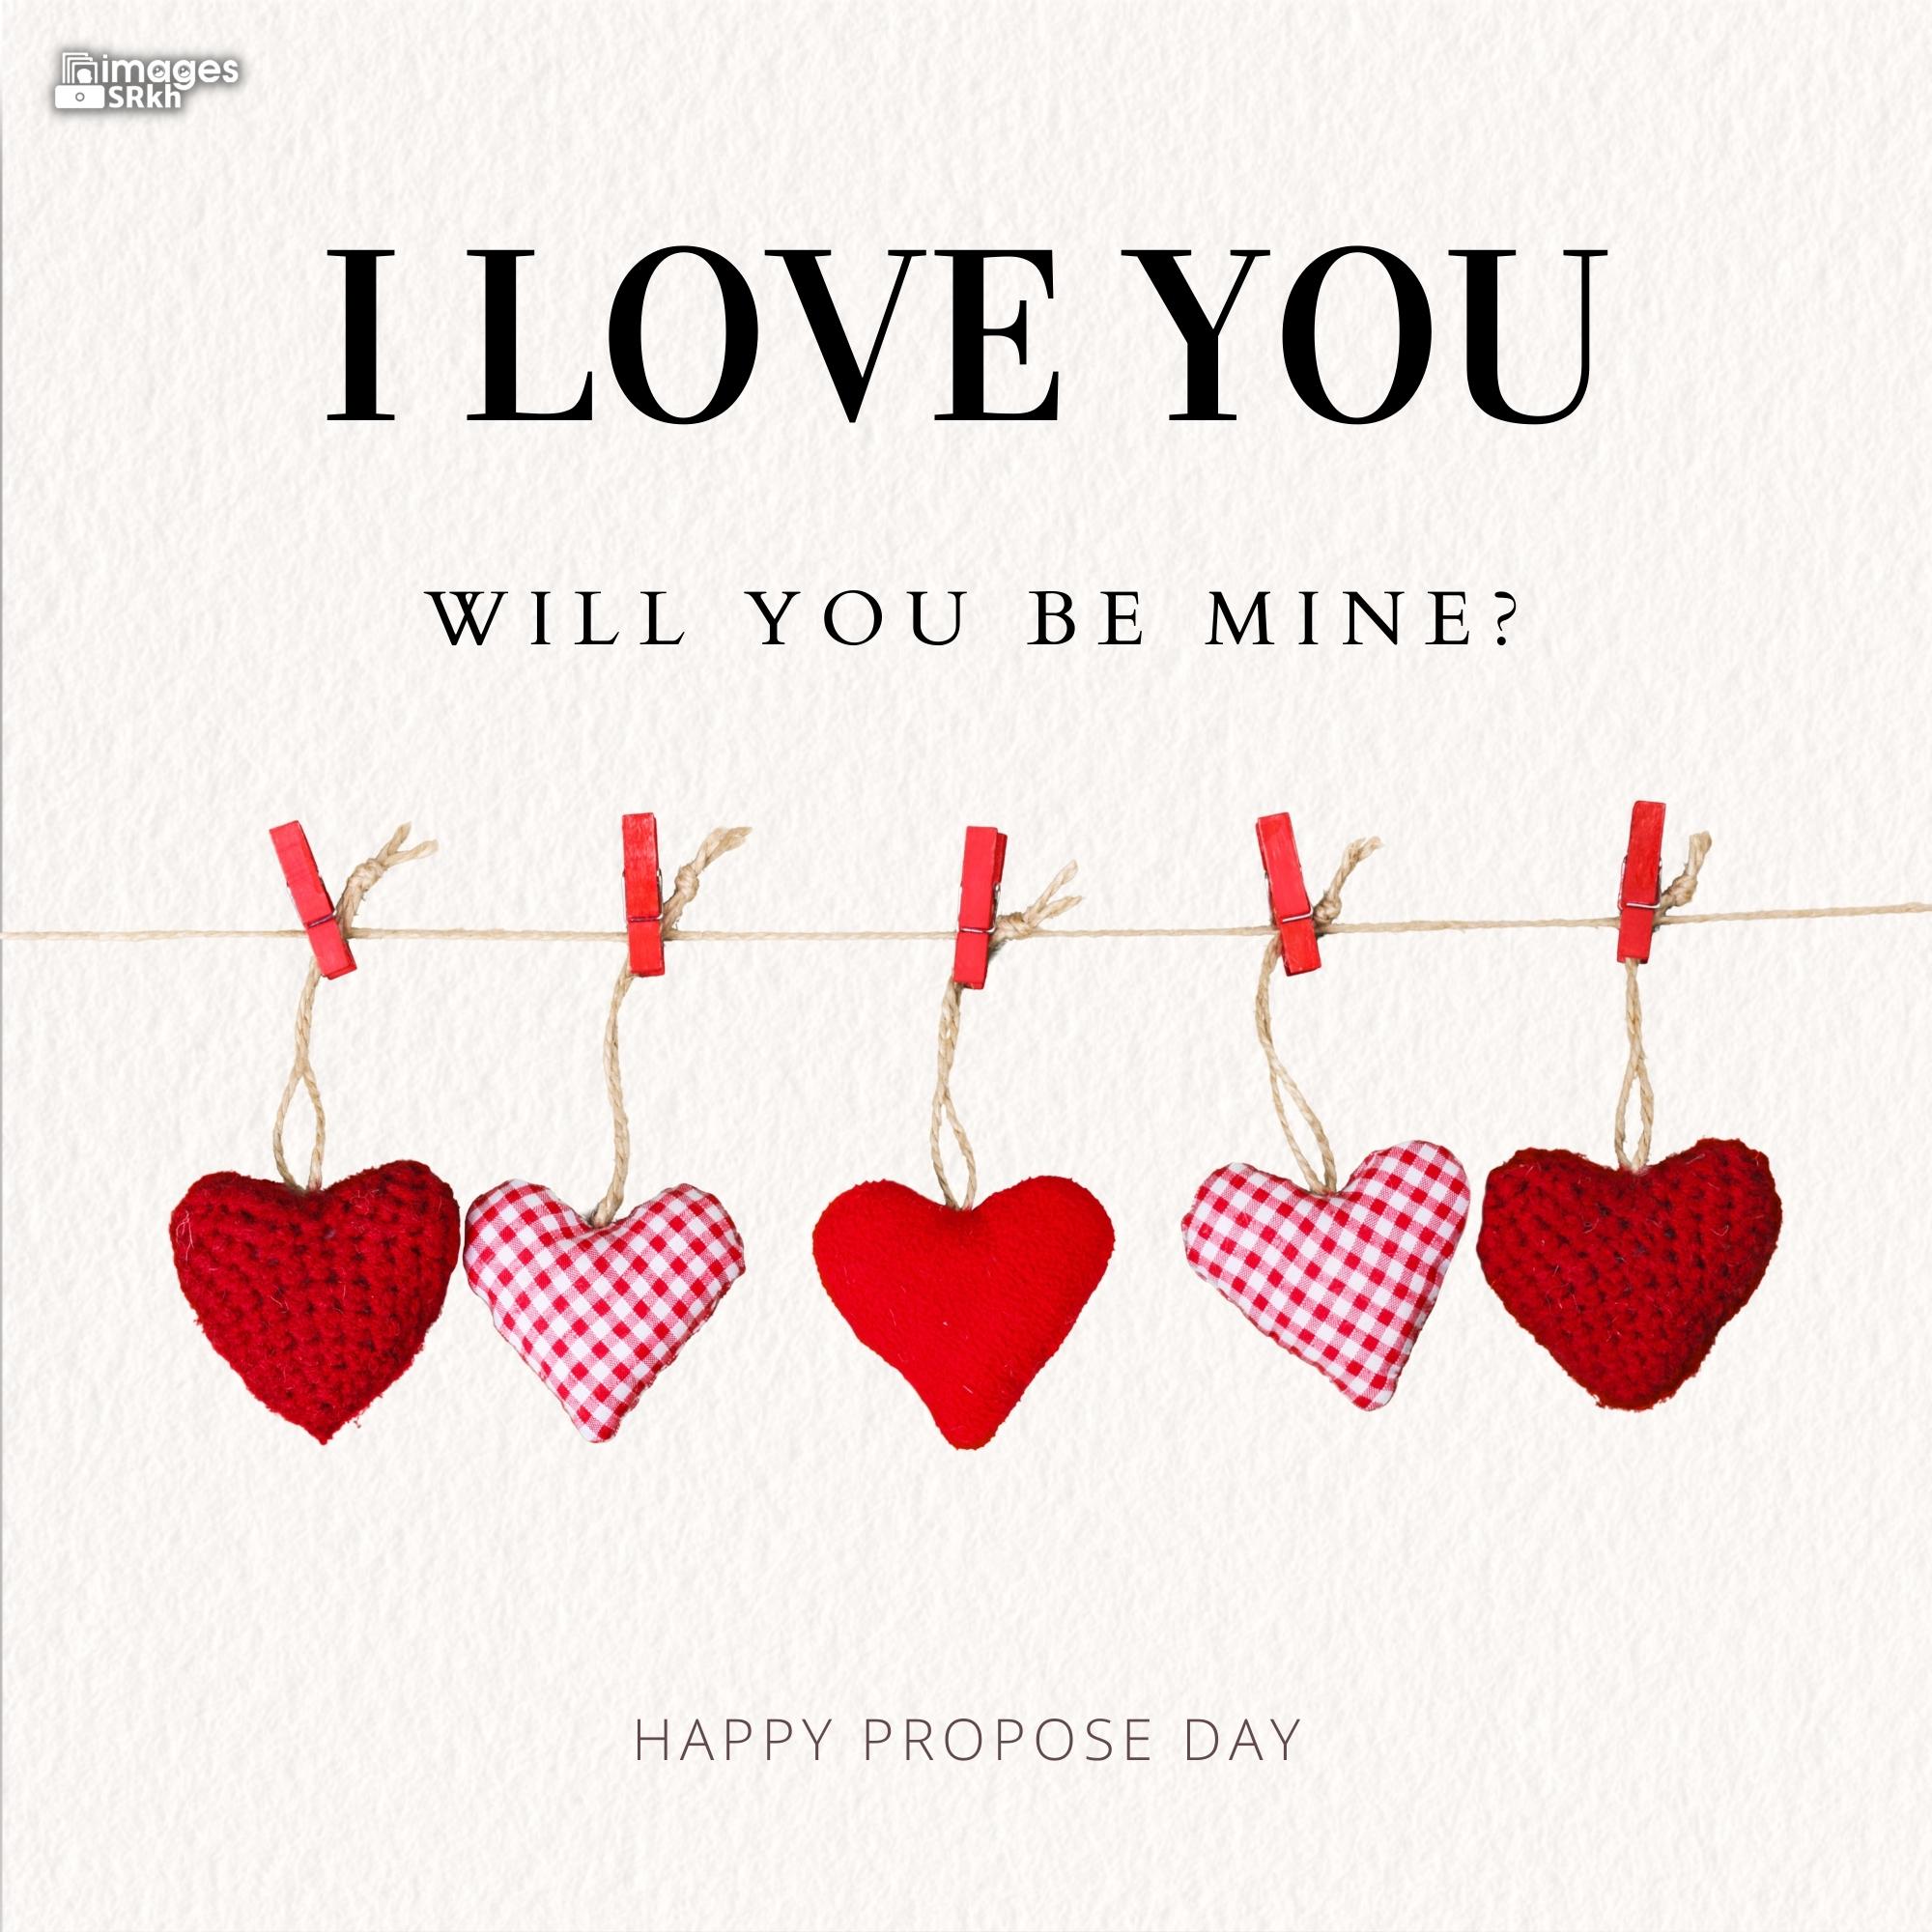 Happy Propose Day Images | 436 | I love you will you be mine